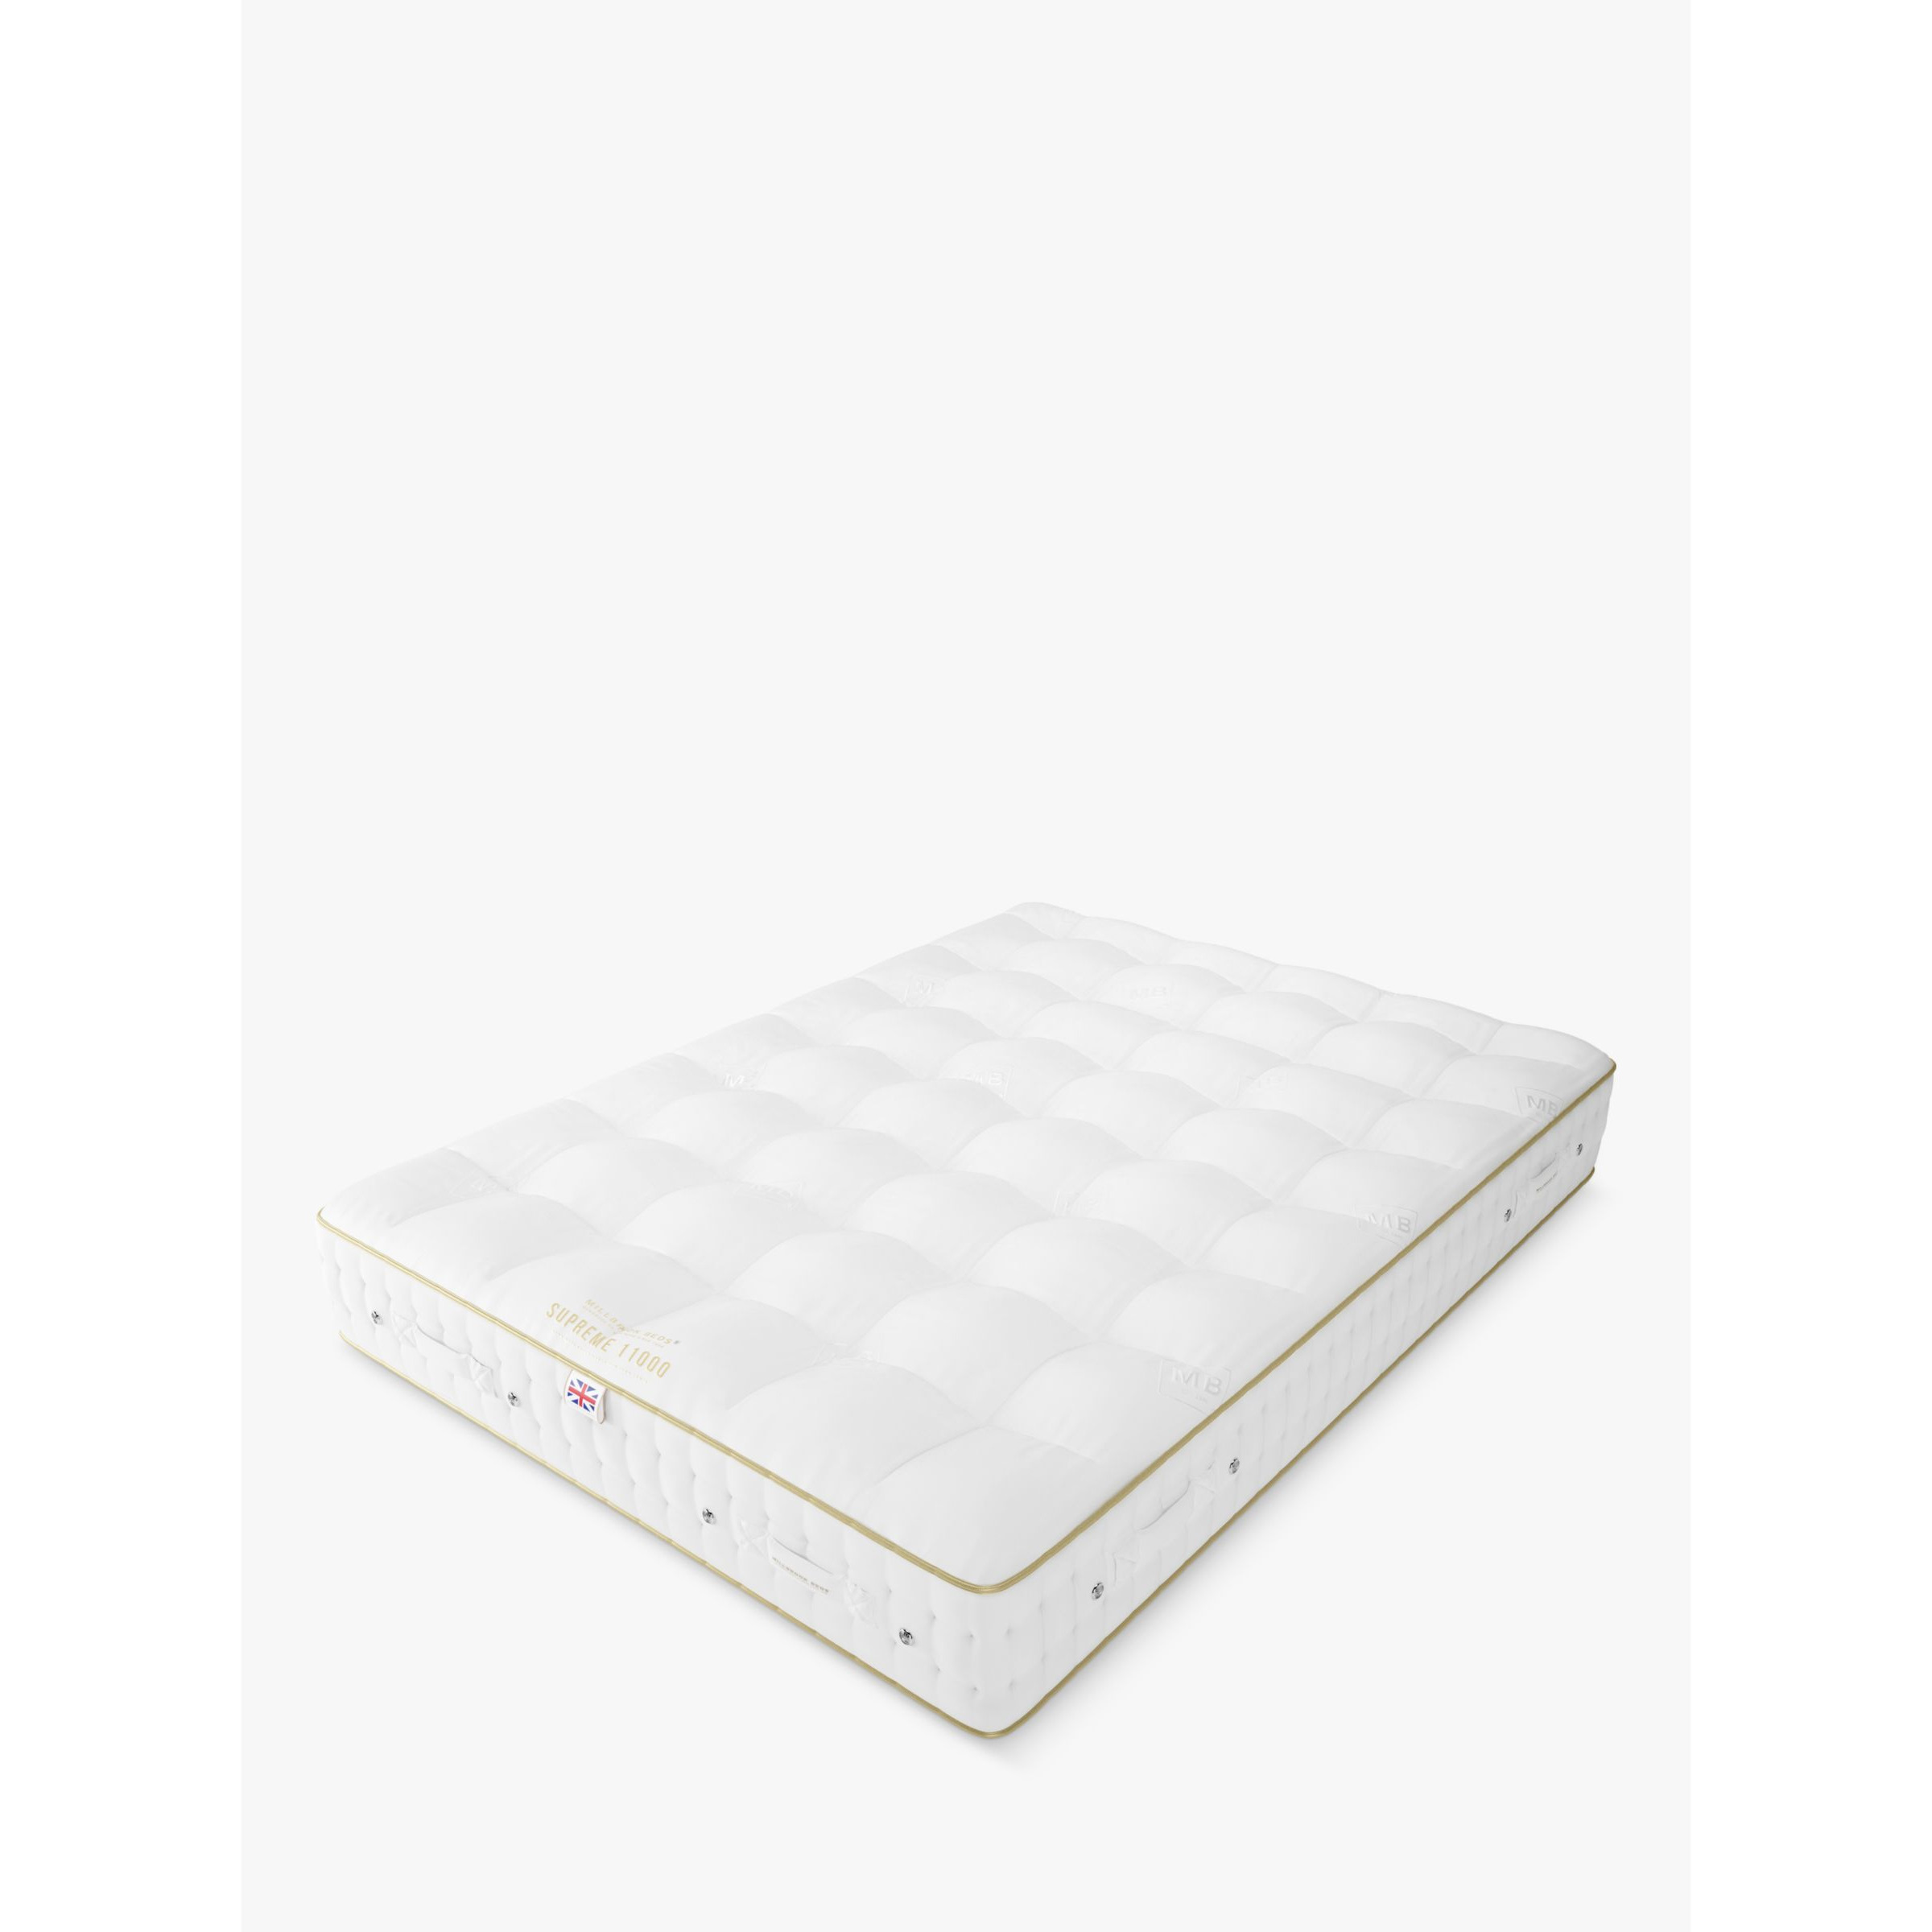 Millbrook Beds Supreme Collection 11000 Zip Link Mattress, Firm Tension, Super King Size - image 1